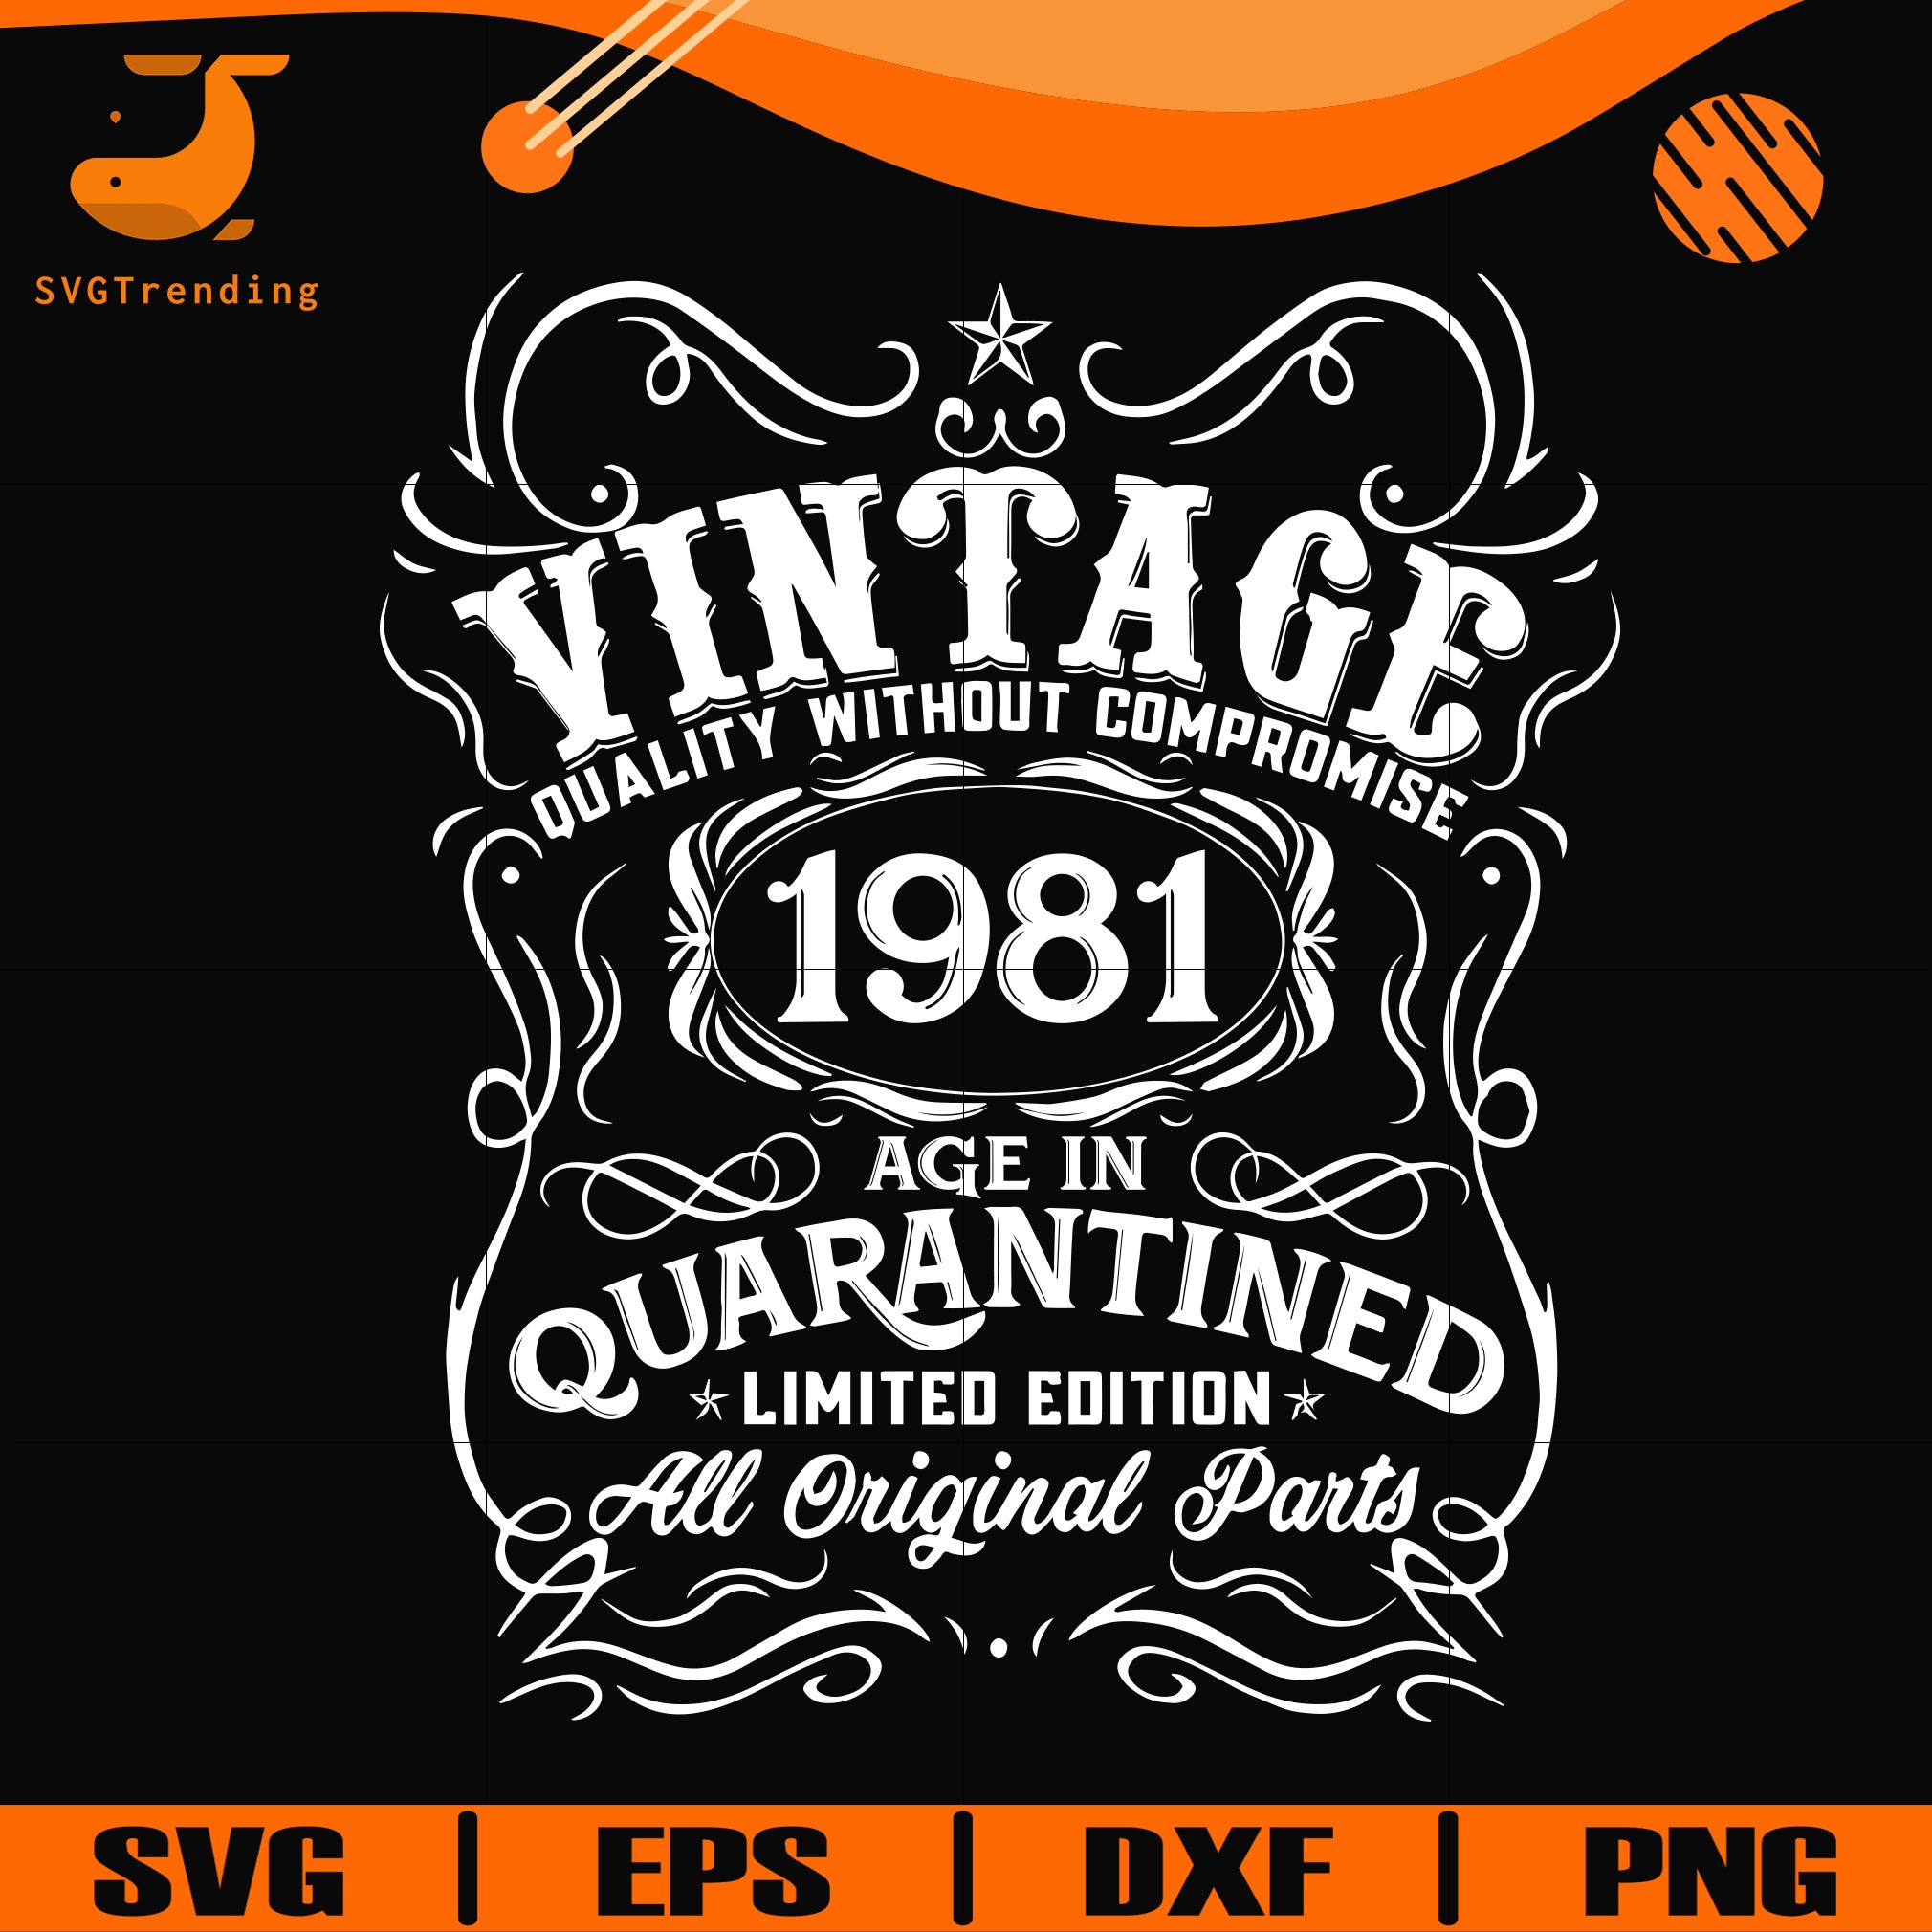 Download Vintage 1981 Age In Quarantined Limited Edition Svg Limited Edition S Svgtrending